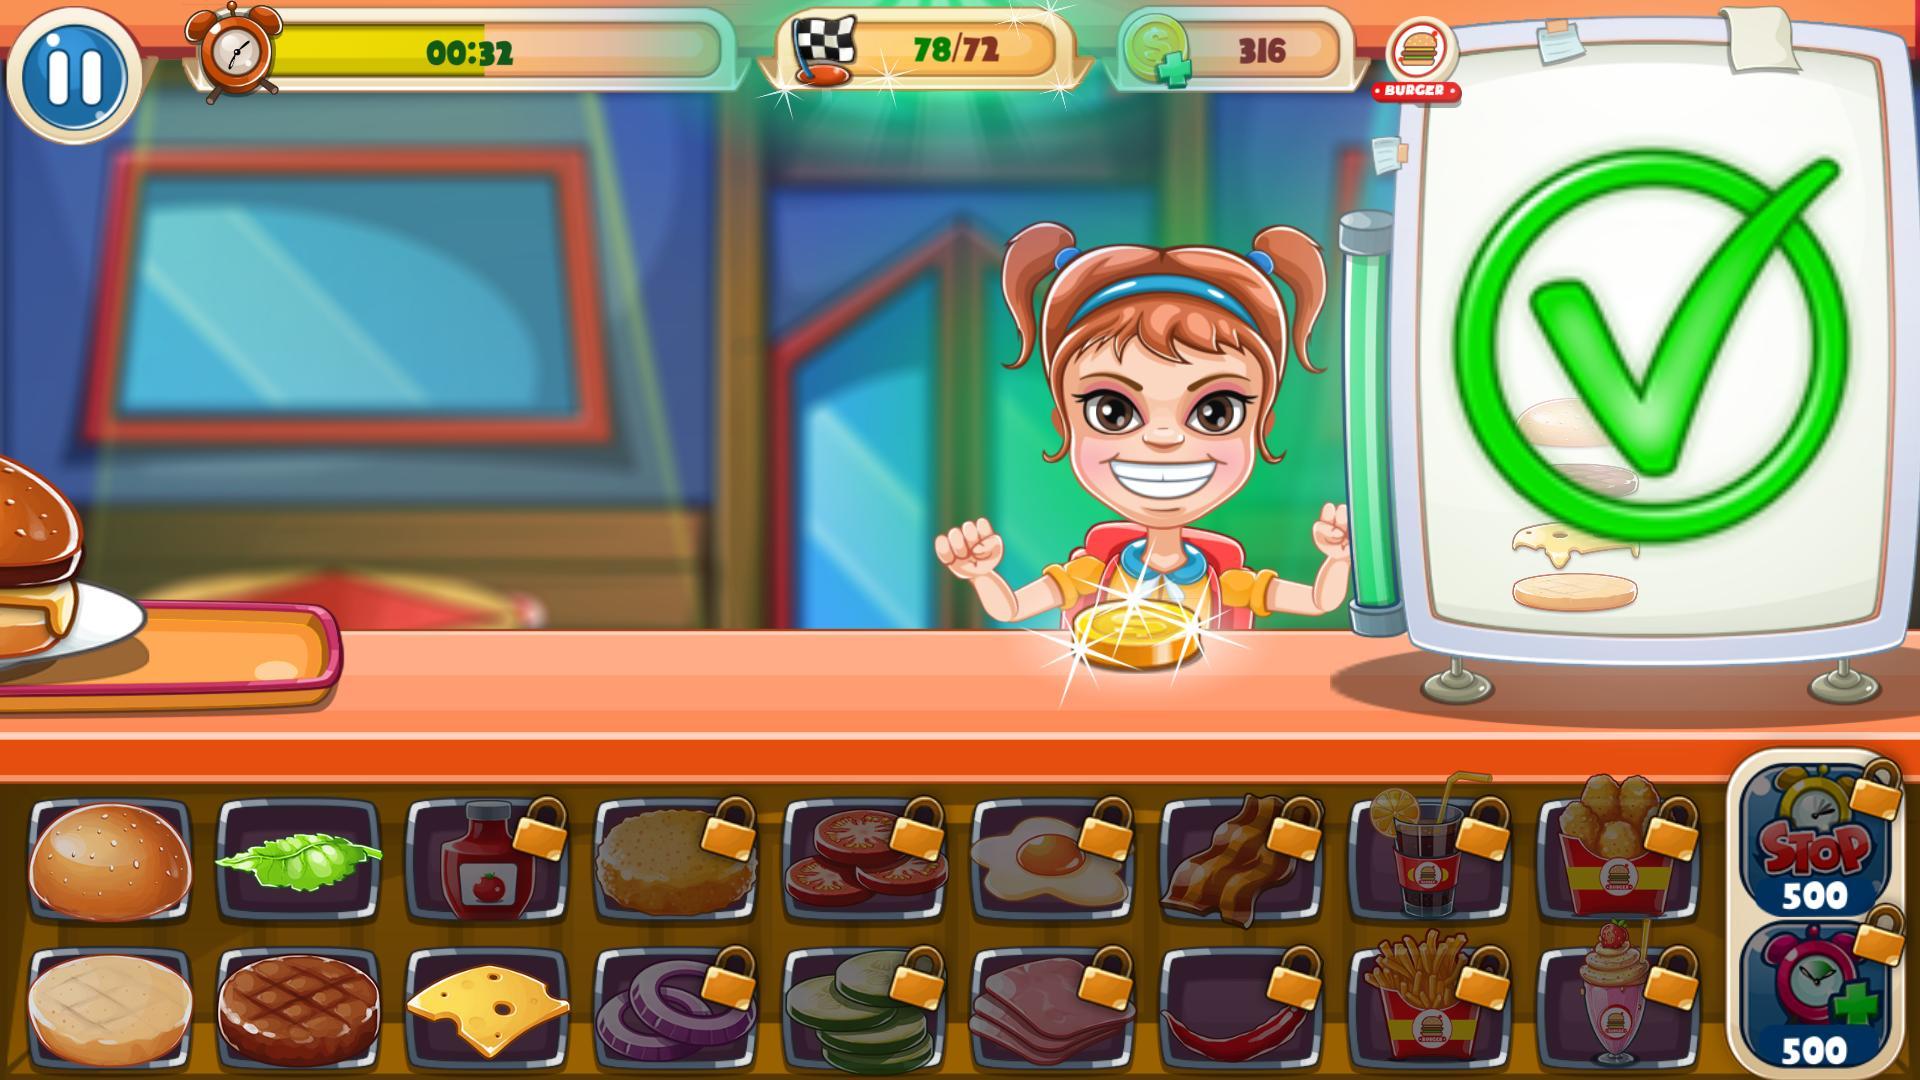 Top Burger PC Download for Free